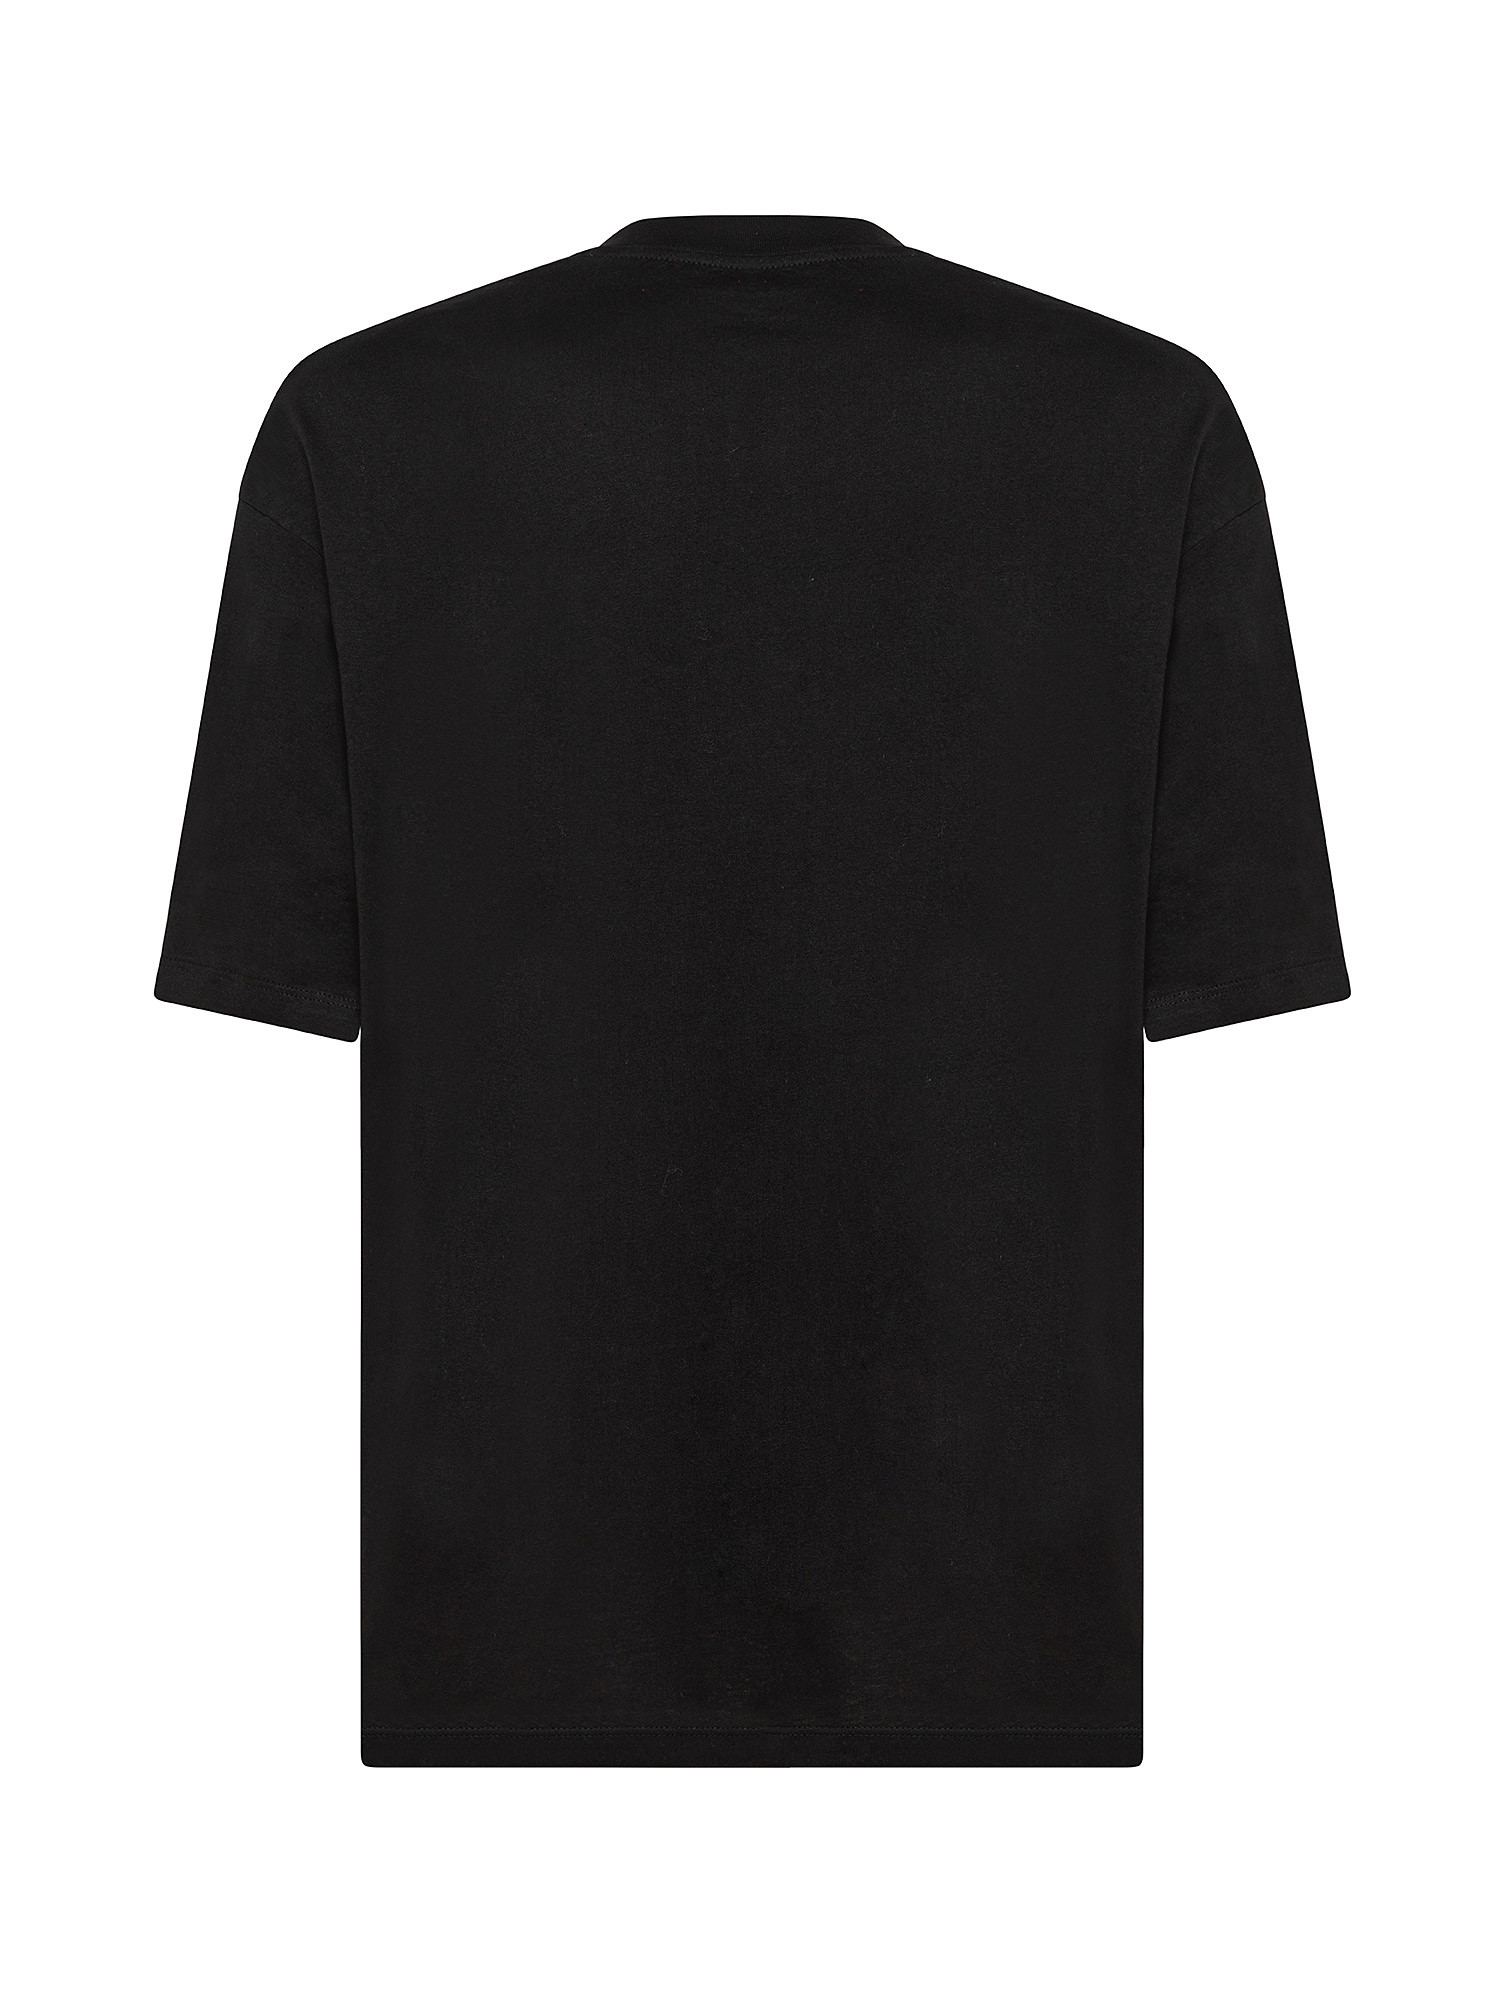 T-shirt in 100% cotton, Black, large image number 1